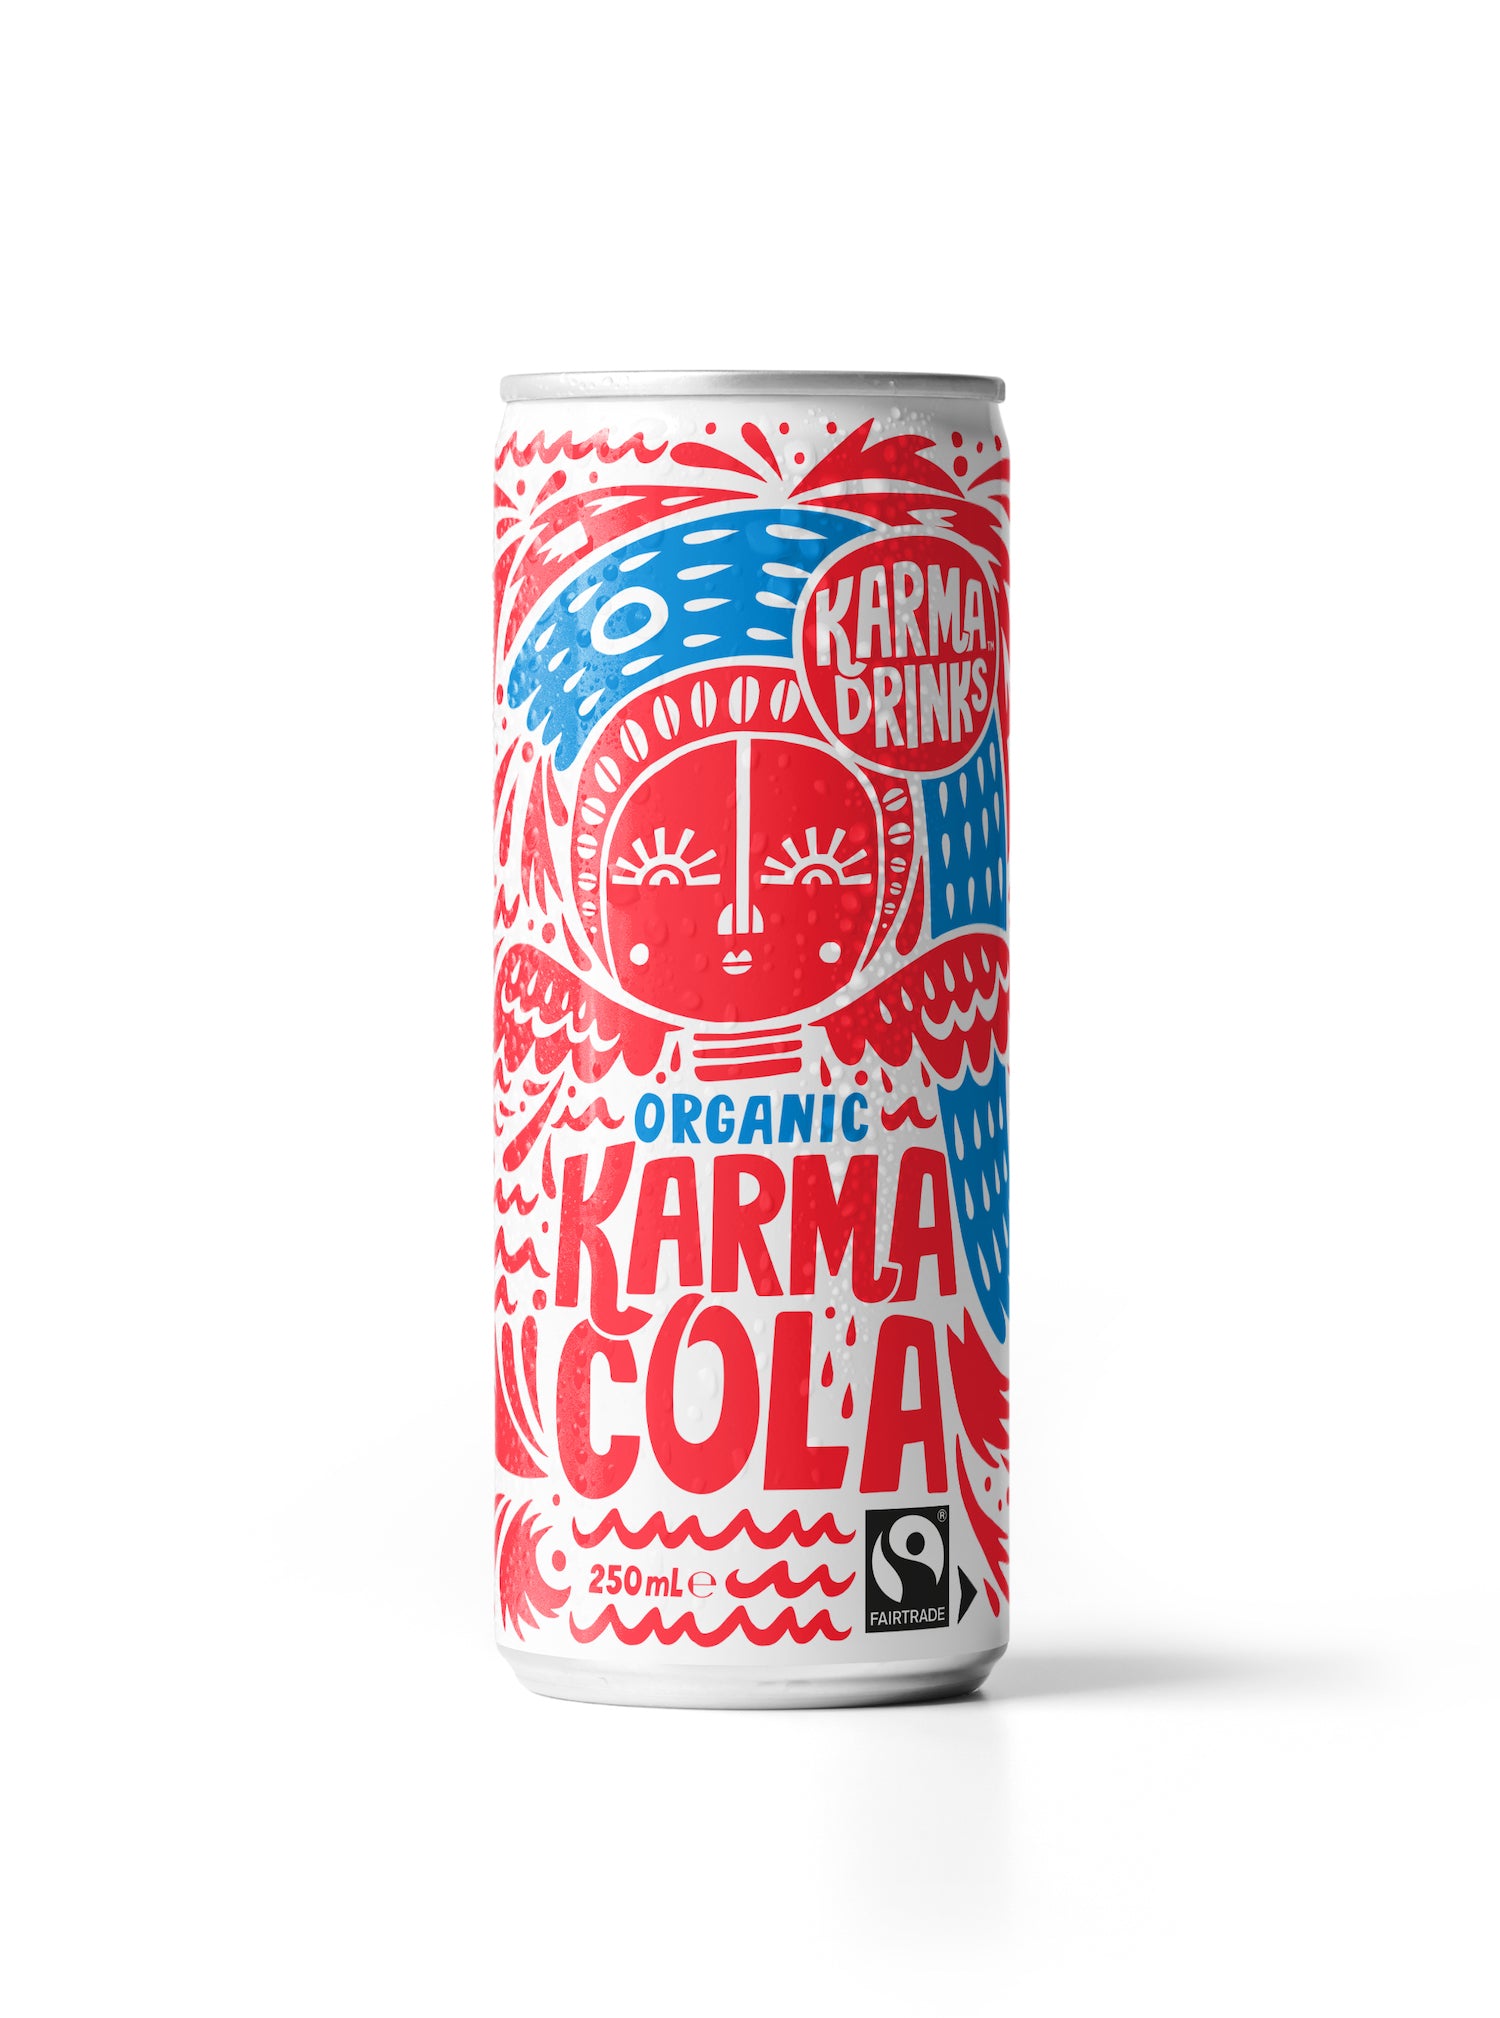 Karma Drinks - Cola Cans // Stores Supply // Karma